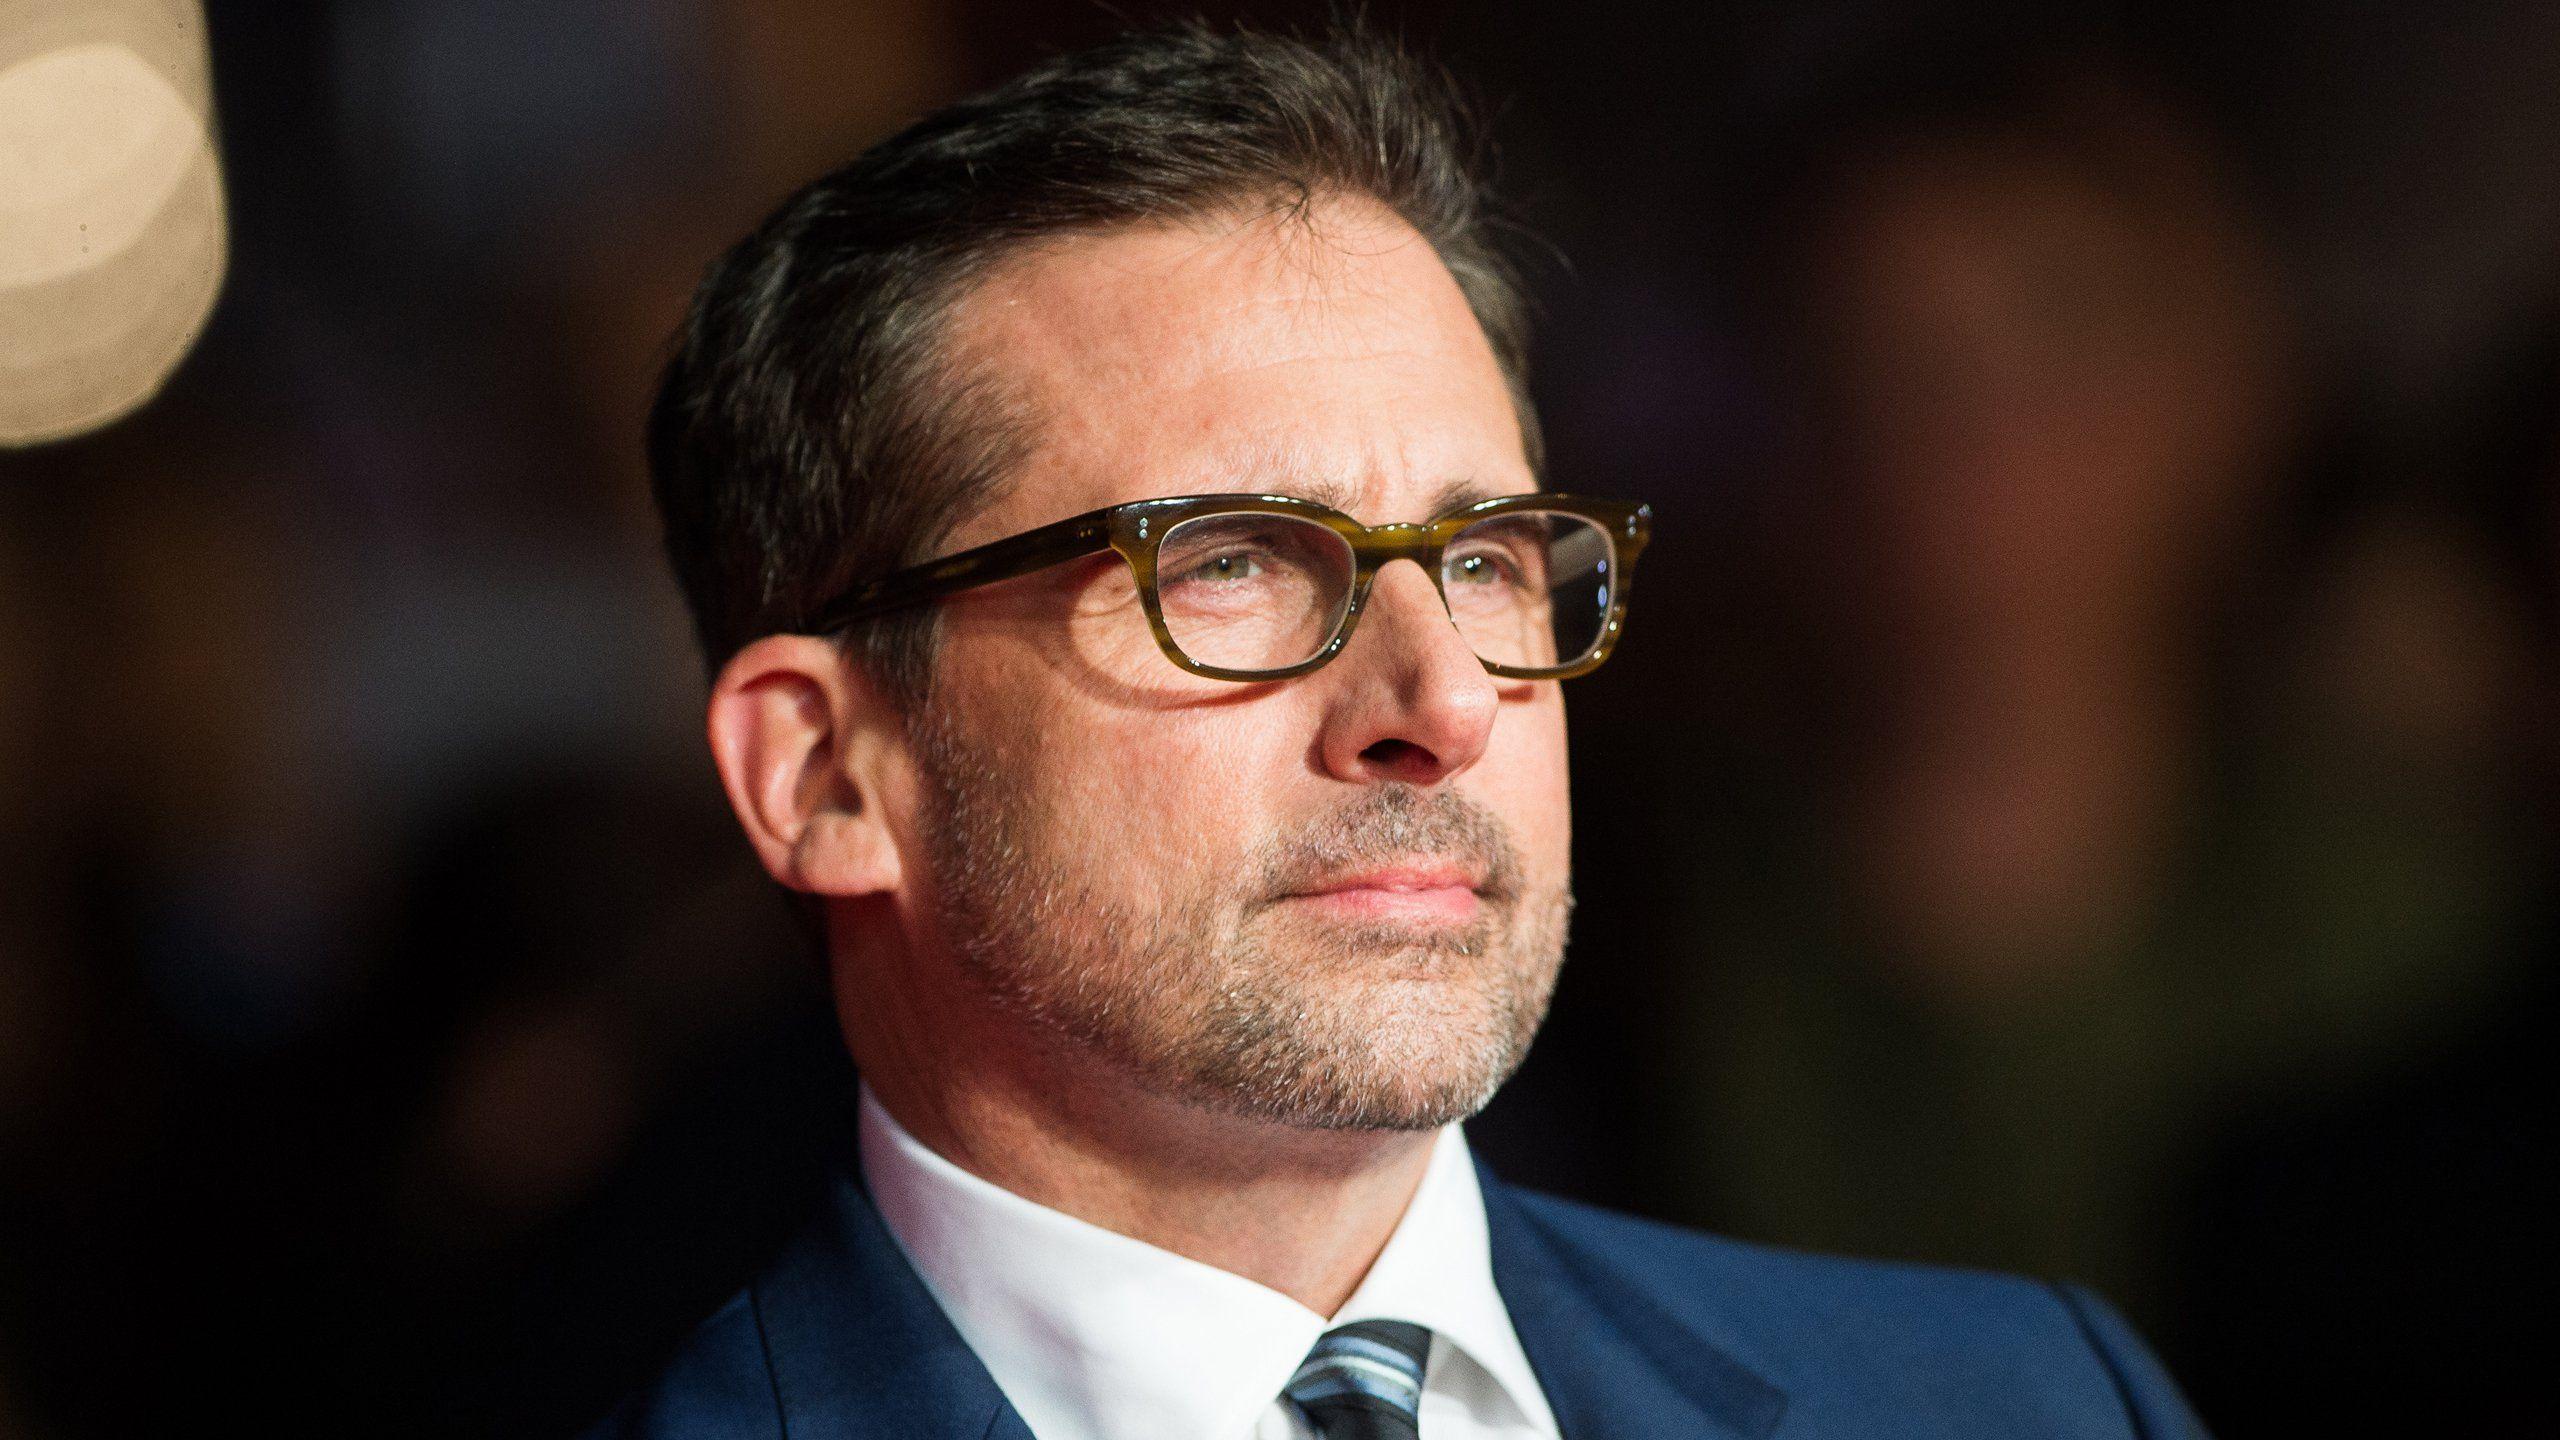 Why Steve Carell Has Left Comedy Behind—For Now